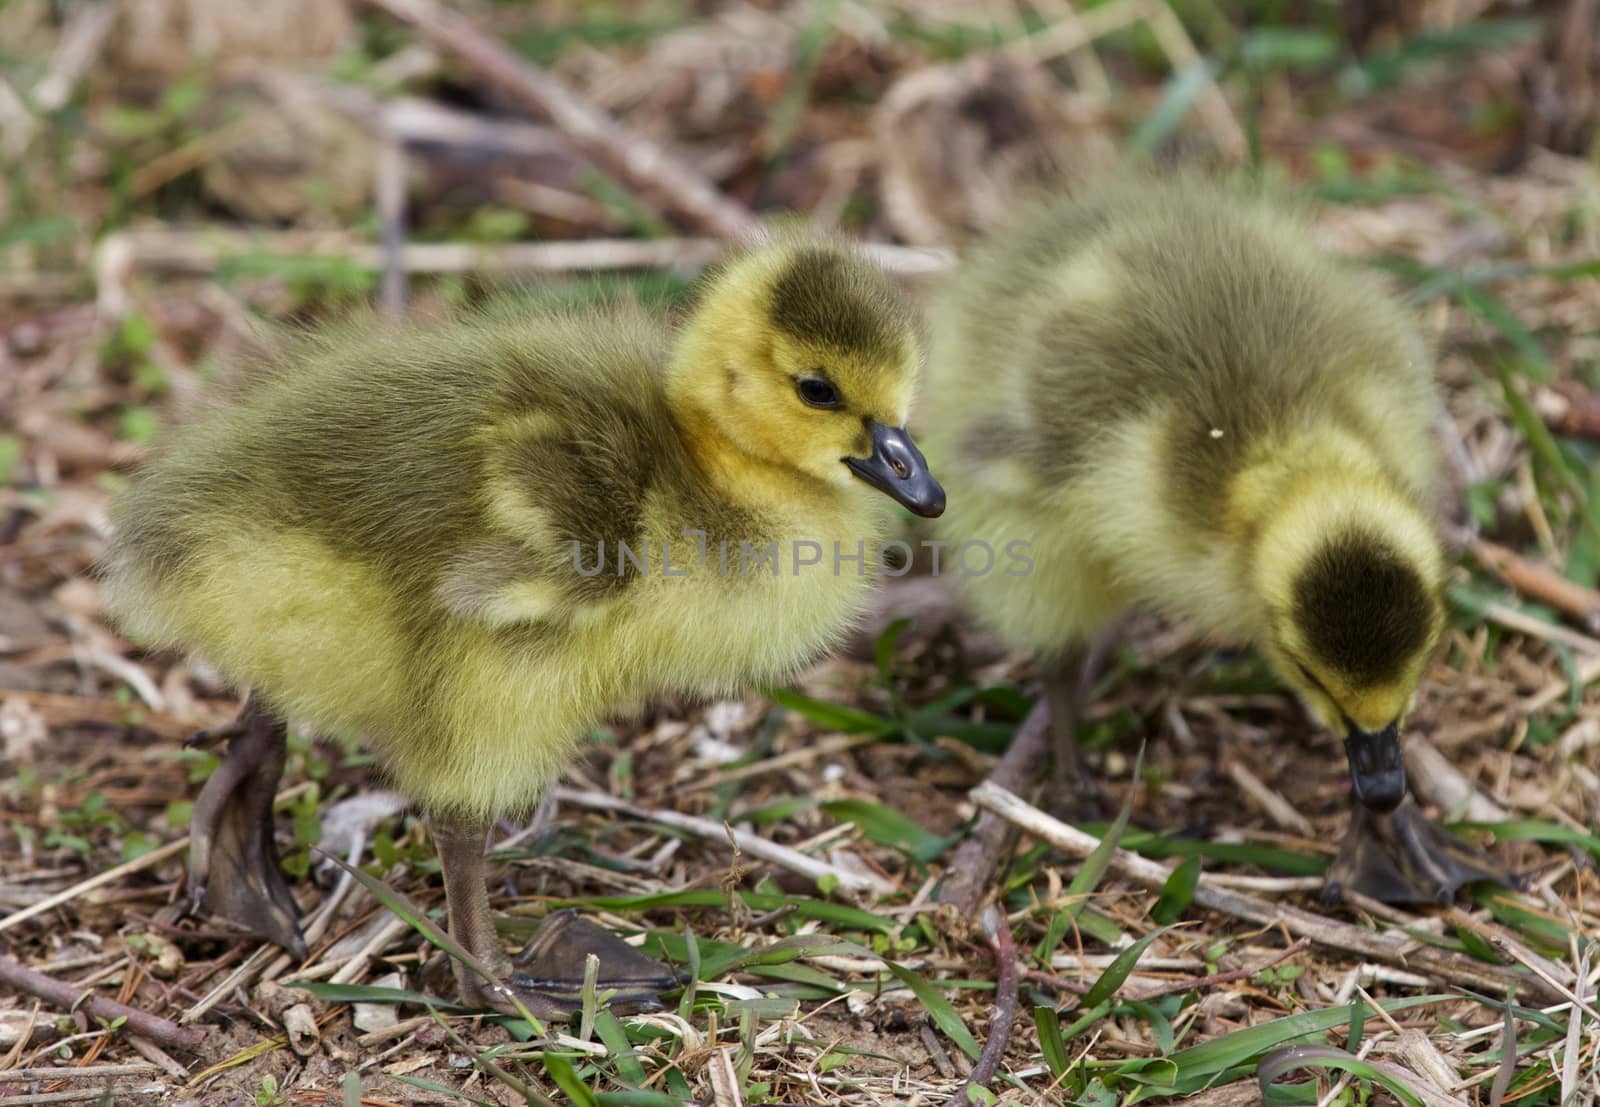 Beautiful photo with two chicks of the Canada geese by teo